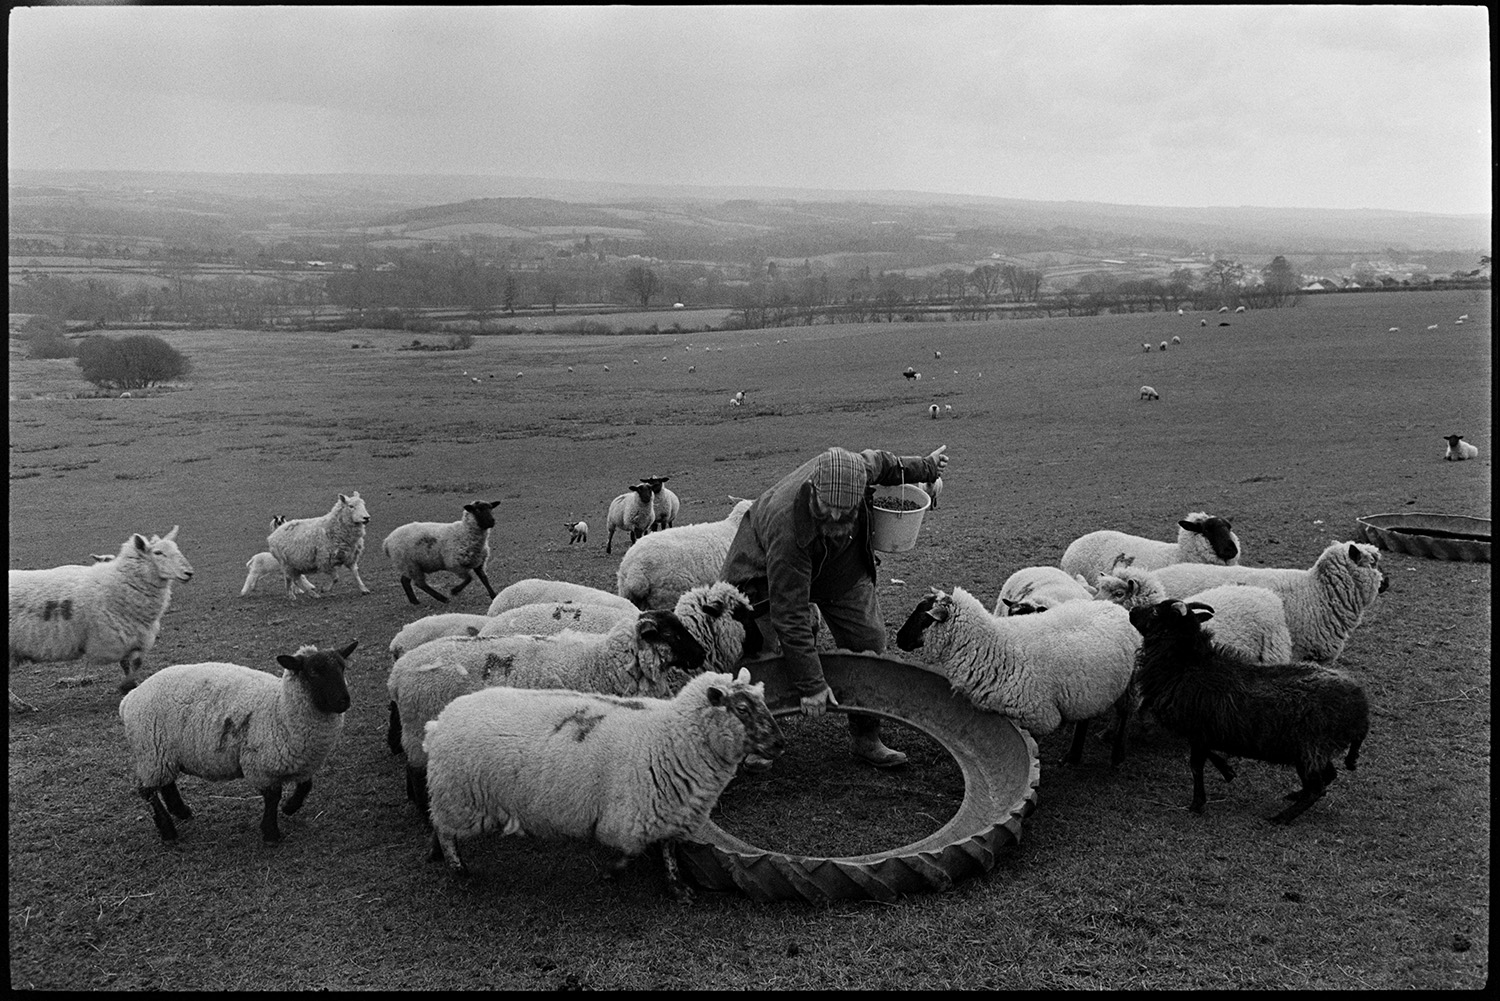 Television crew filming the photographer working on moor.
[A man moving a tractor tyre feeding trough to feed sheep in a field on Hatherleigh Moor. Views of fields and hills can be seen in the distance.]